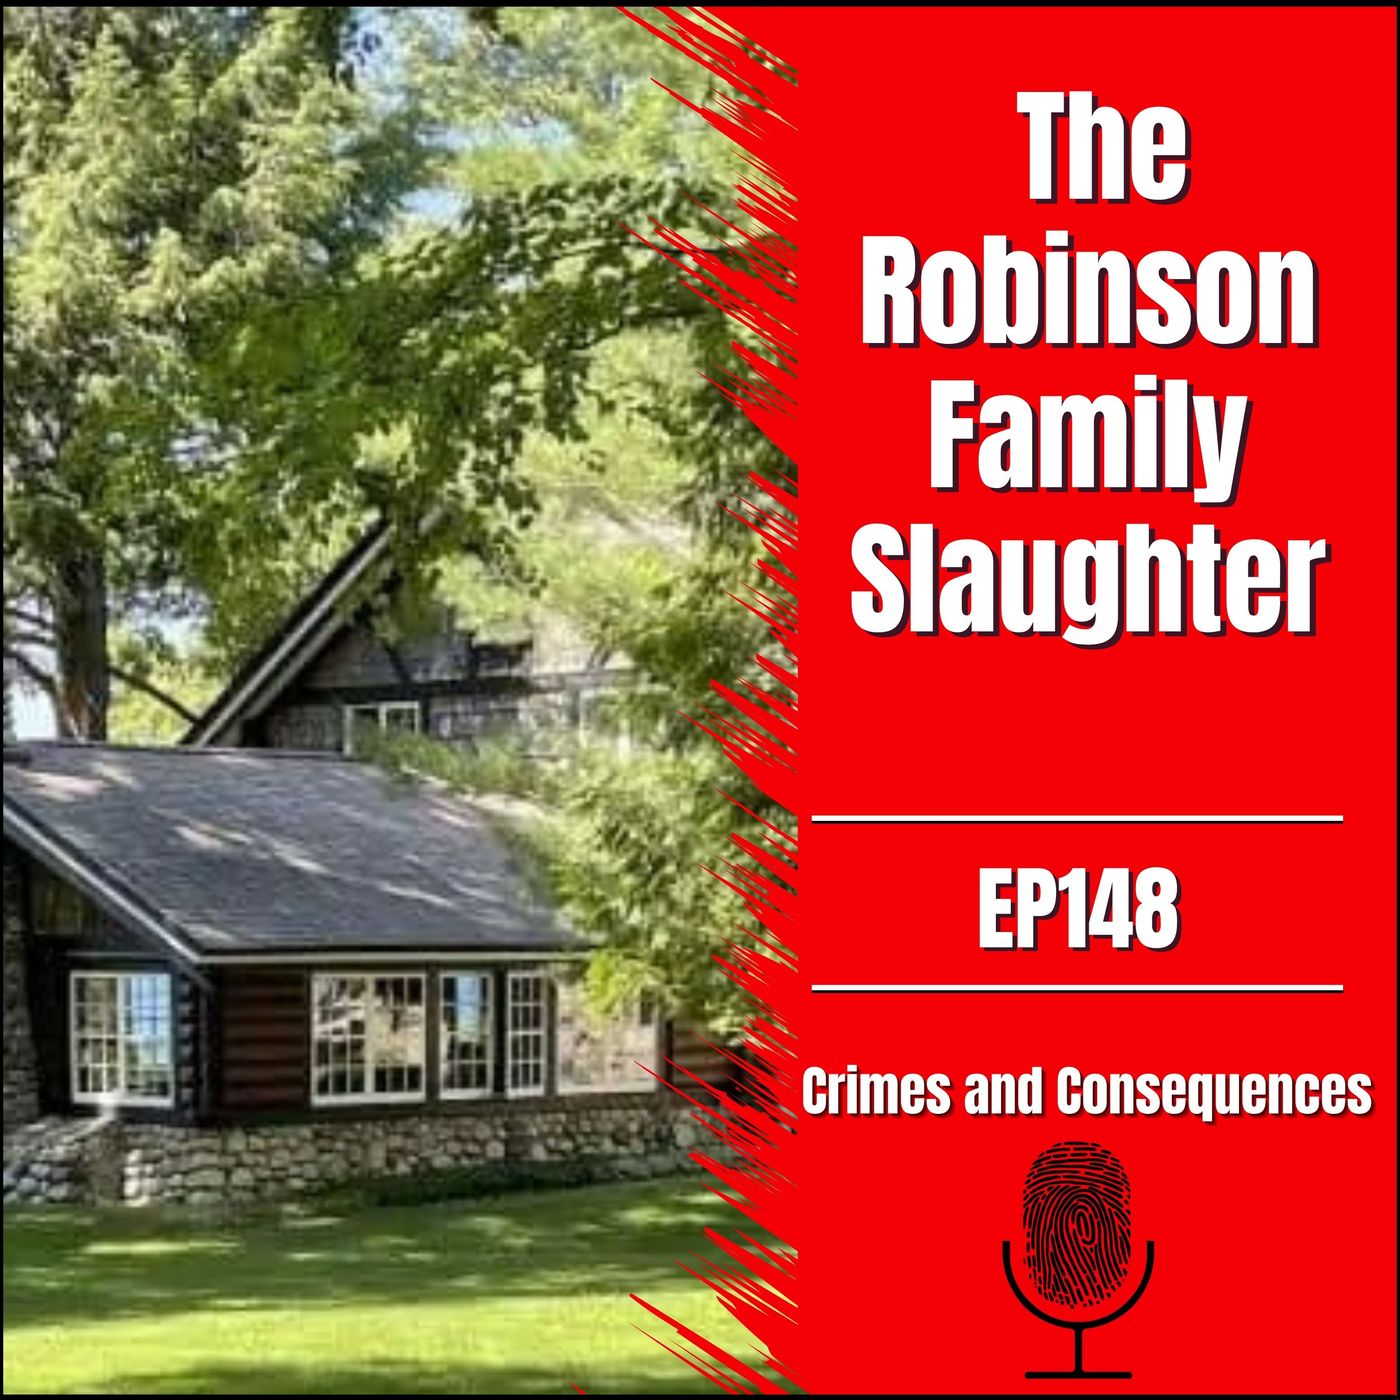 EP148: THE ROBINSON FAMILY SLAUGHTER